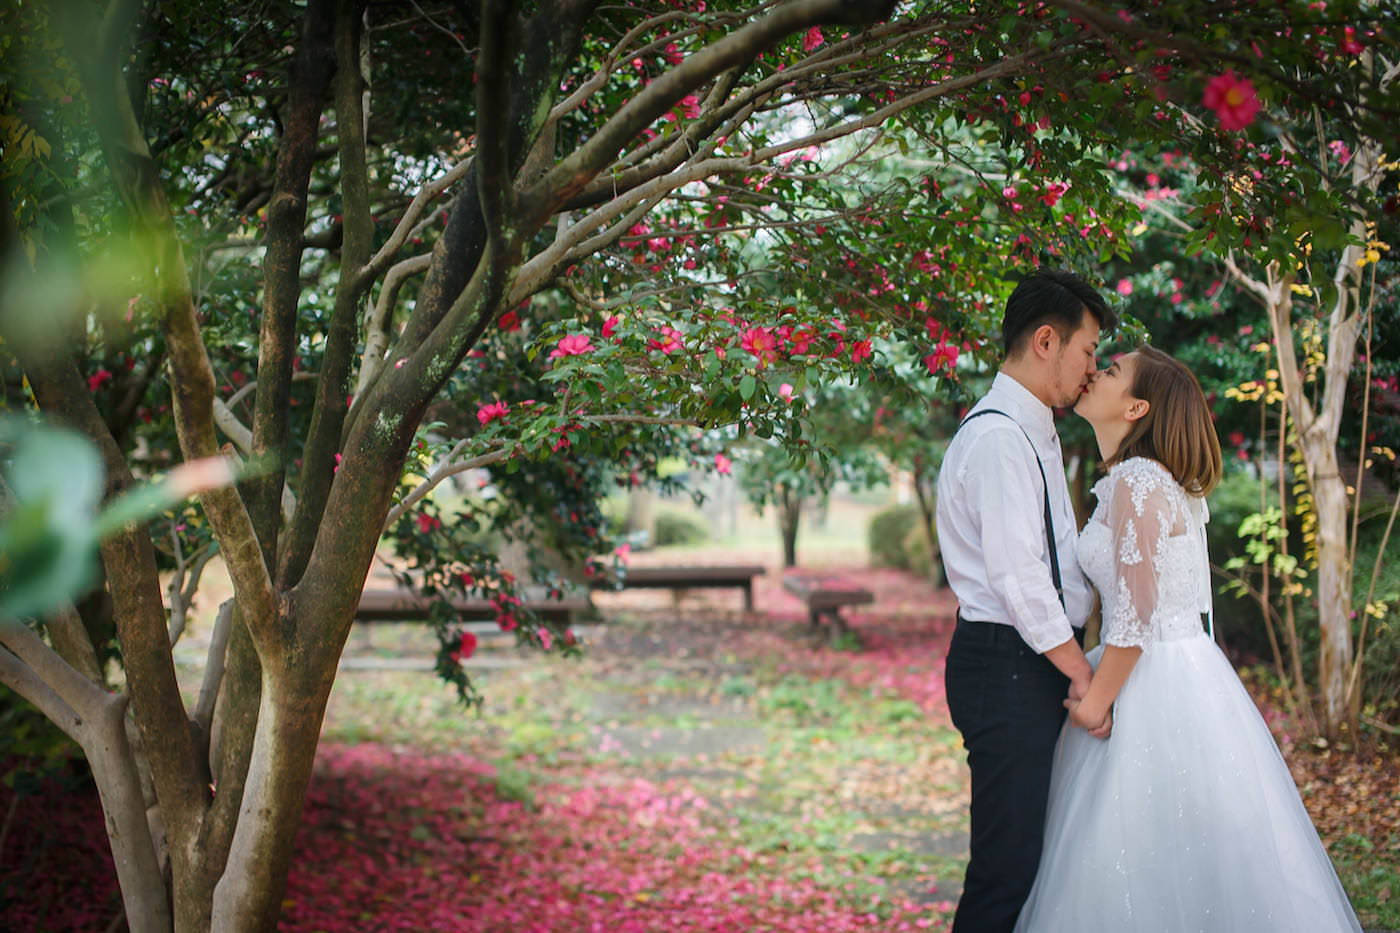 Pre-wedding photo by Ayako of a couple kissing at pink garden